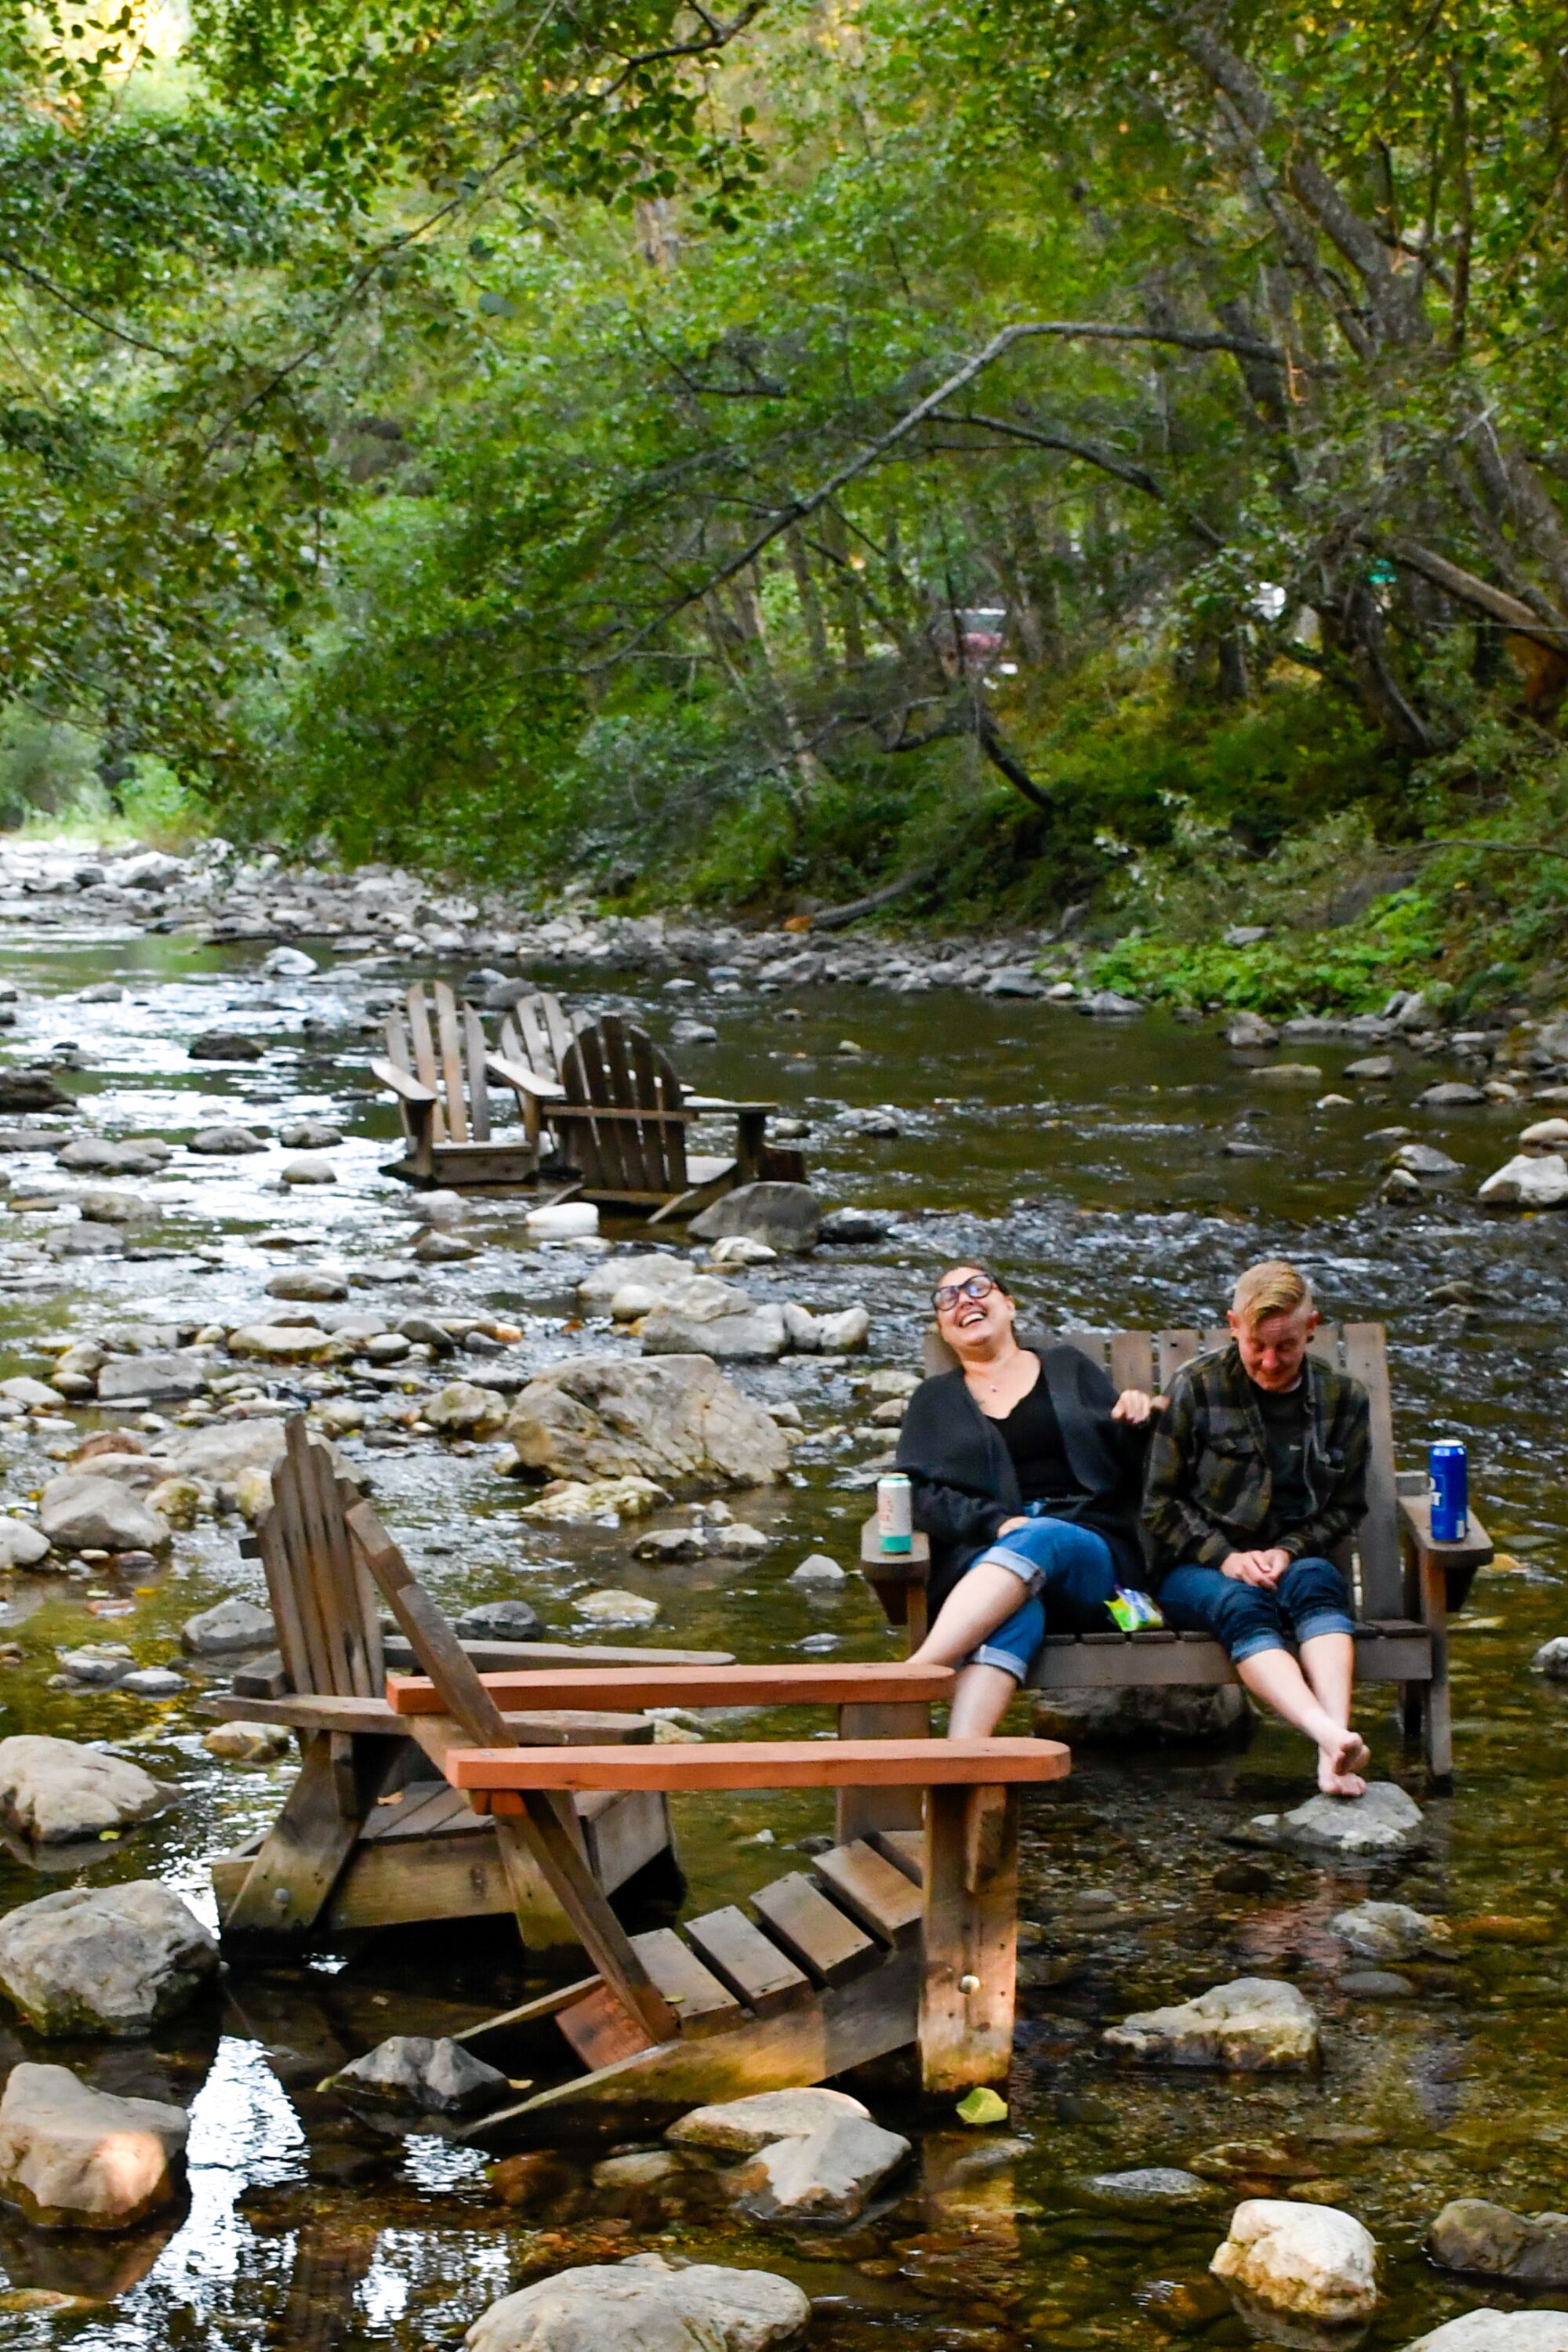 Two people sit in wooden chairs in the middle of a shallow part of a forested river.